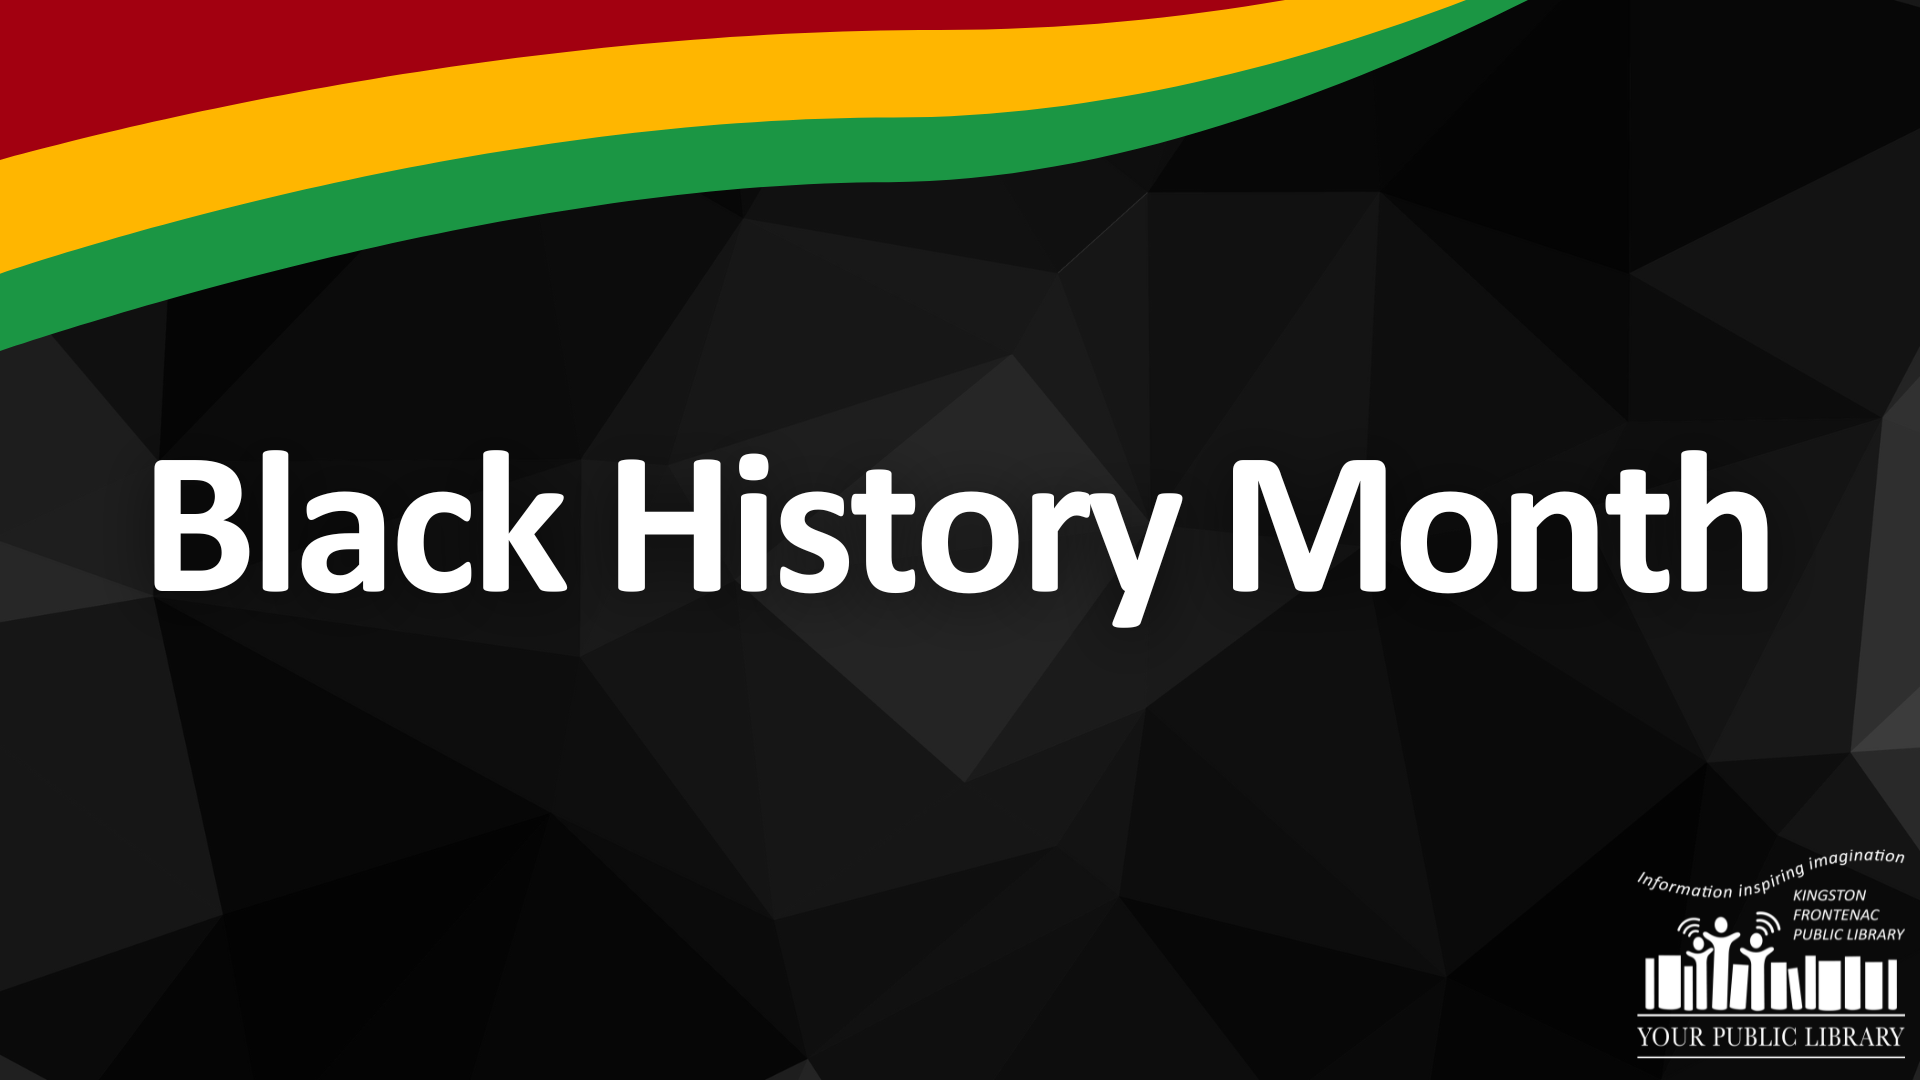 Red, yellow and green stripes against a Black geometric background. Text reads Black History Month.